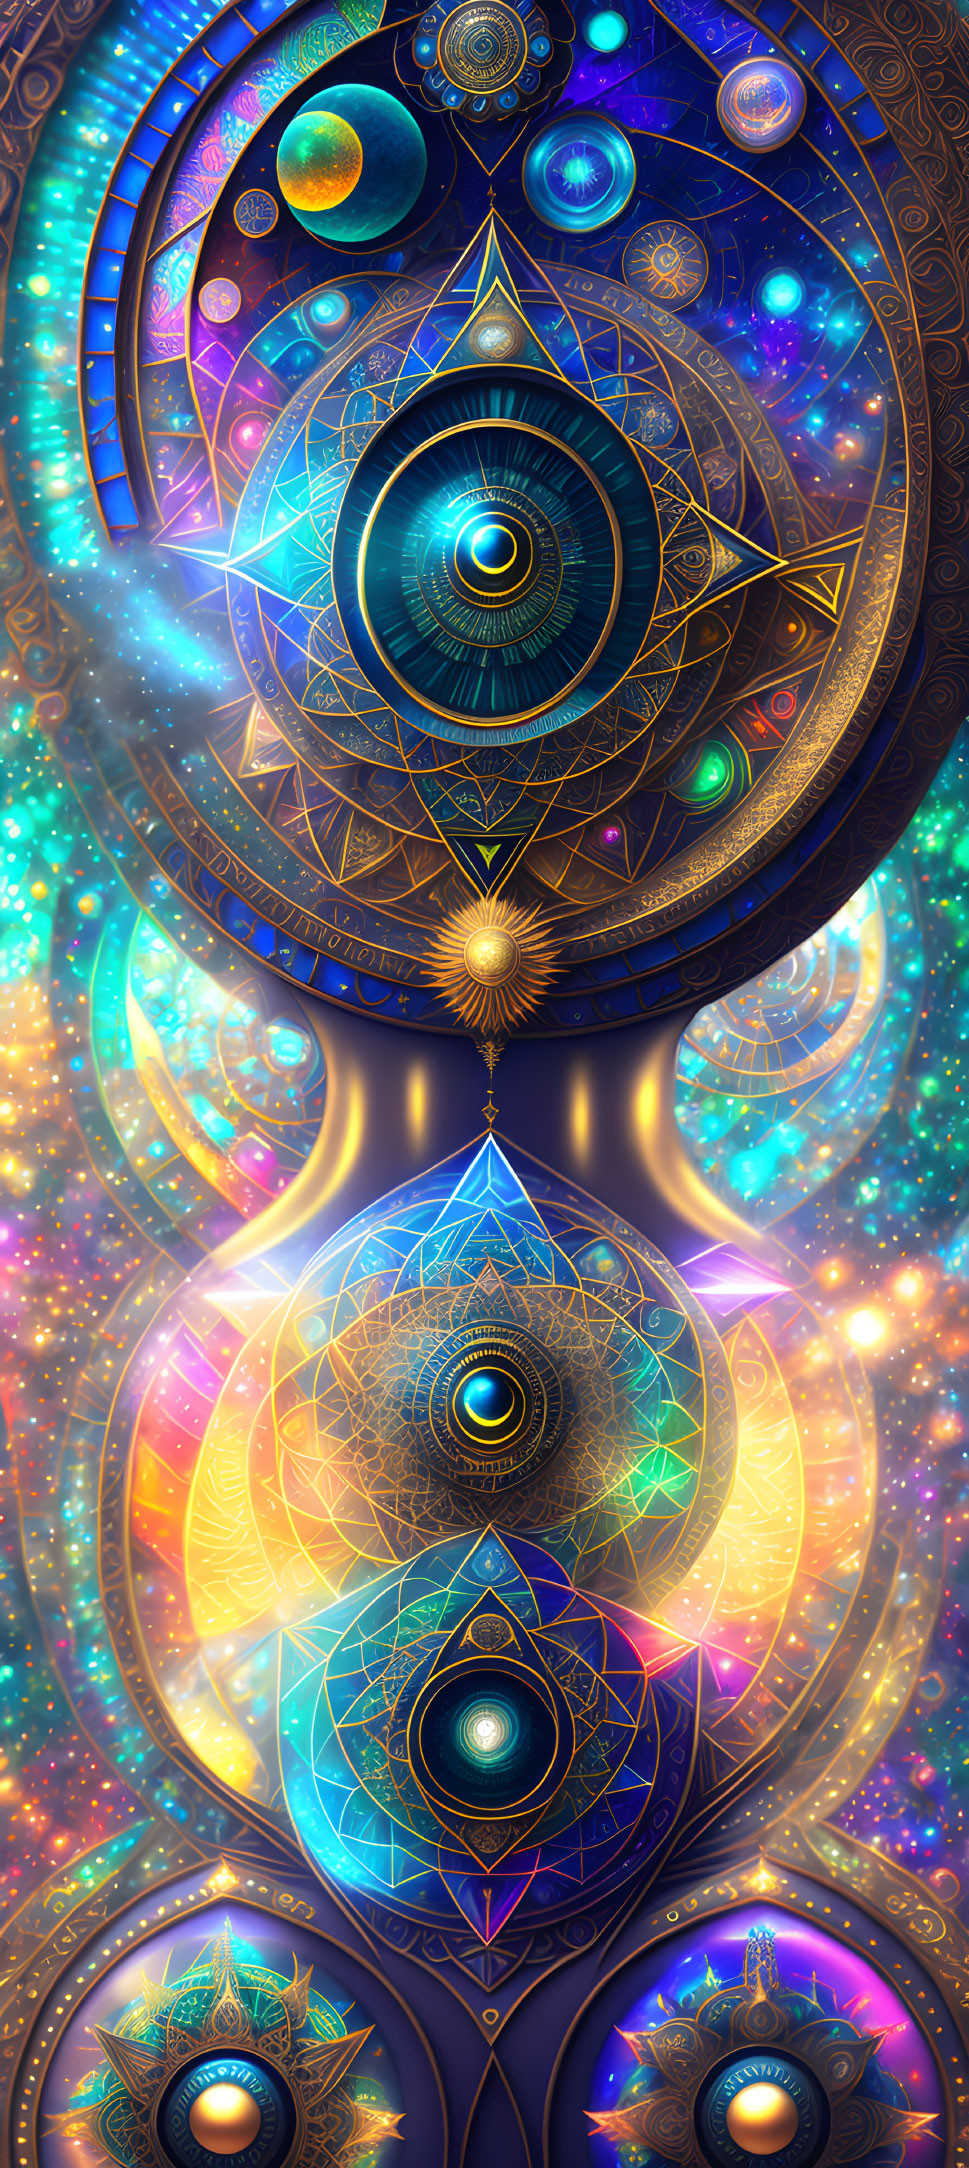 Cosmic-themed digital artwork with intricate patterns and celestial motifs